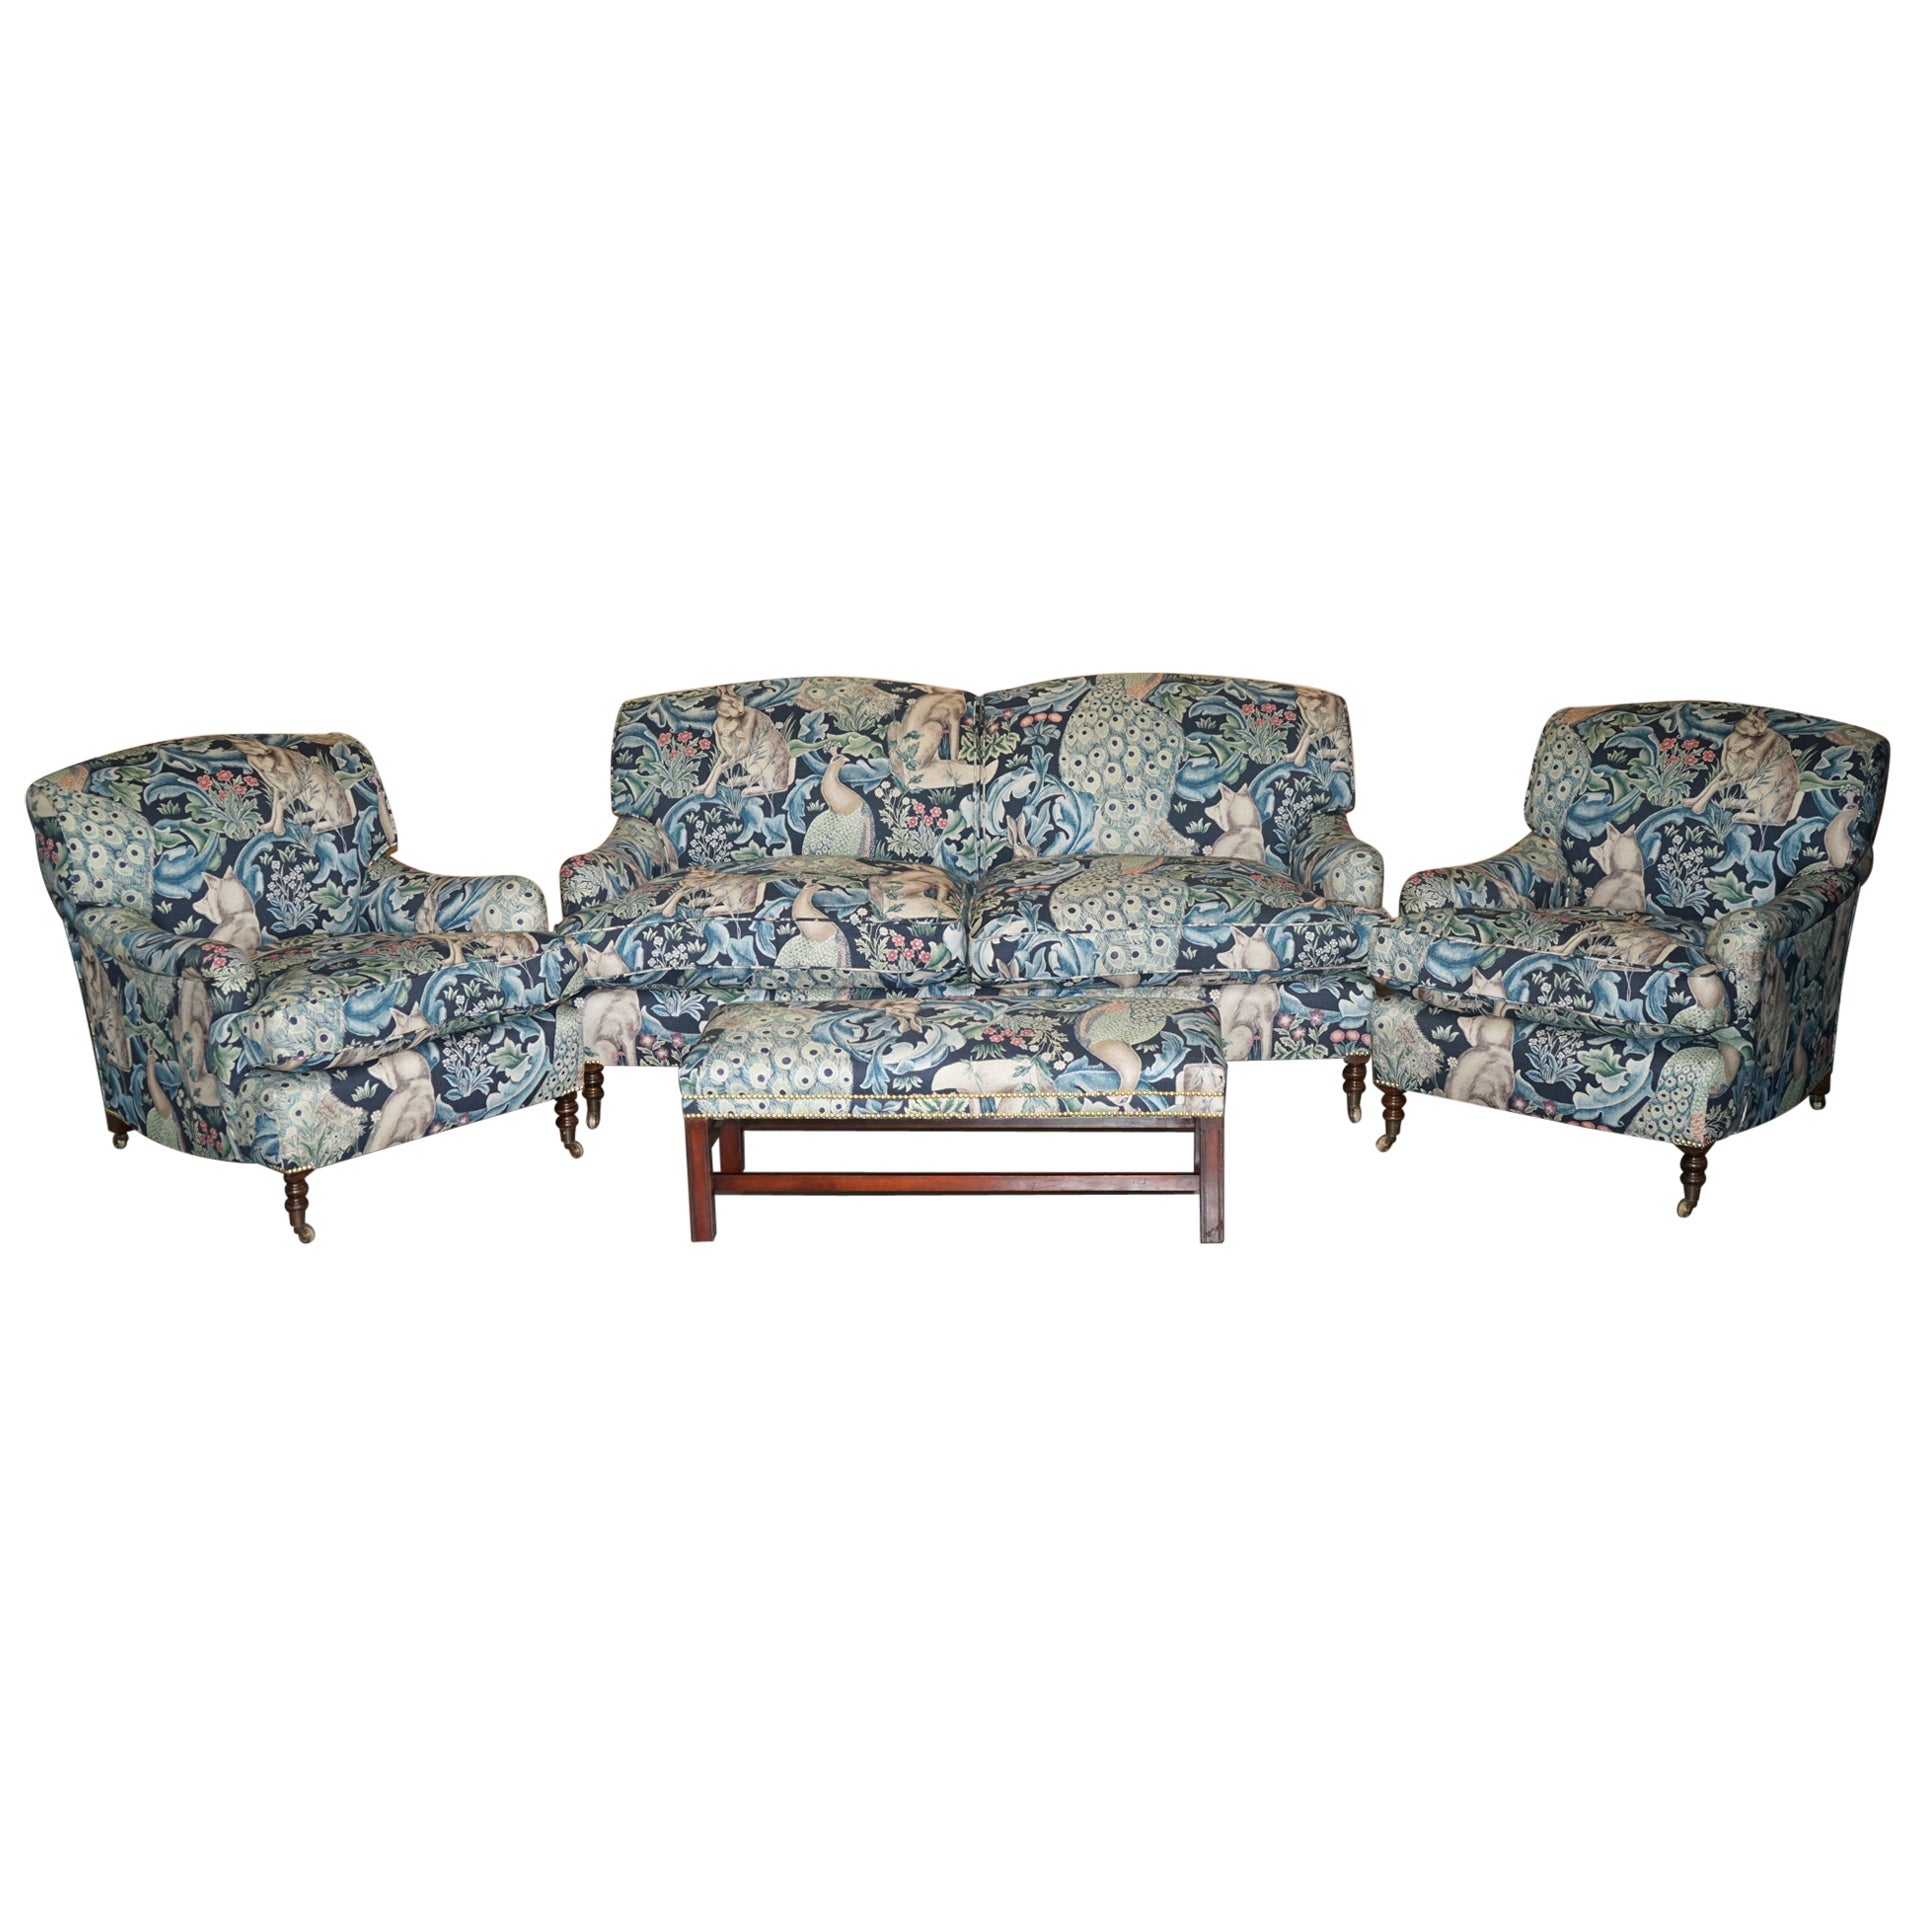  GEORGE SMiTH HOWARD and Sons WILLIAM MORRIS SOFA ARMCHAIR SUITE